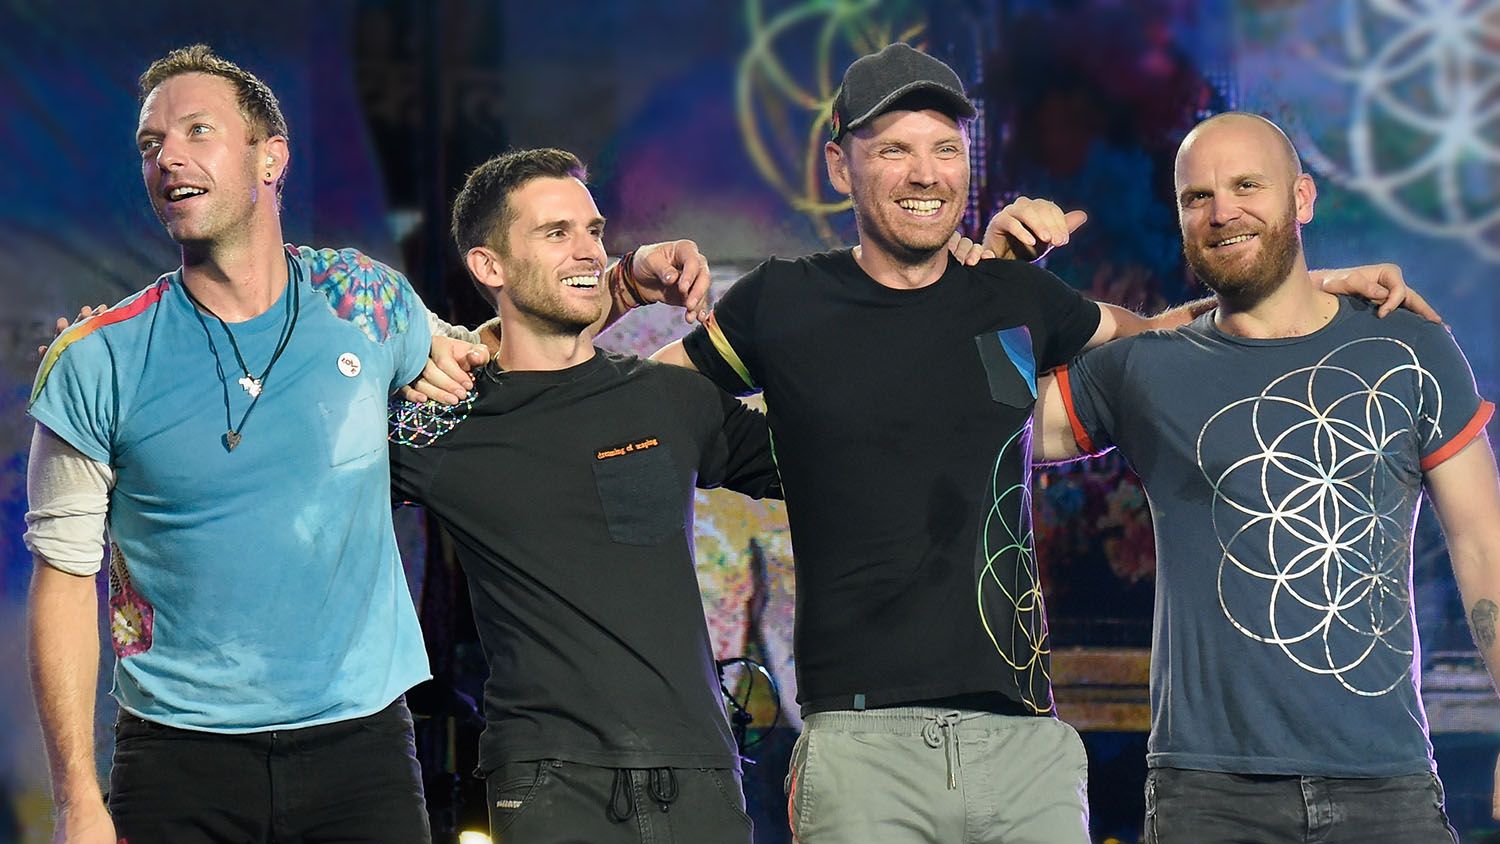 when did coldplay last tour uk